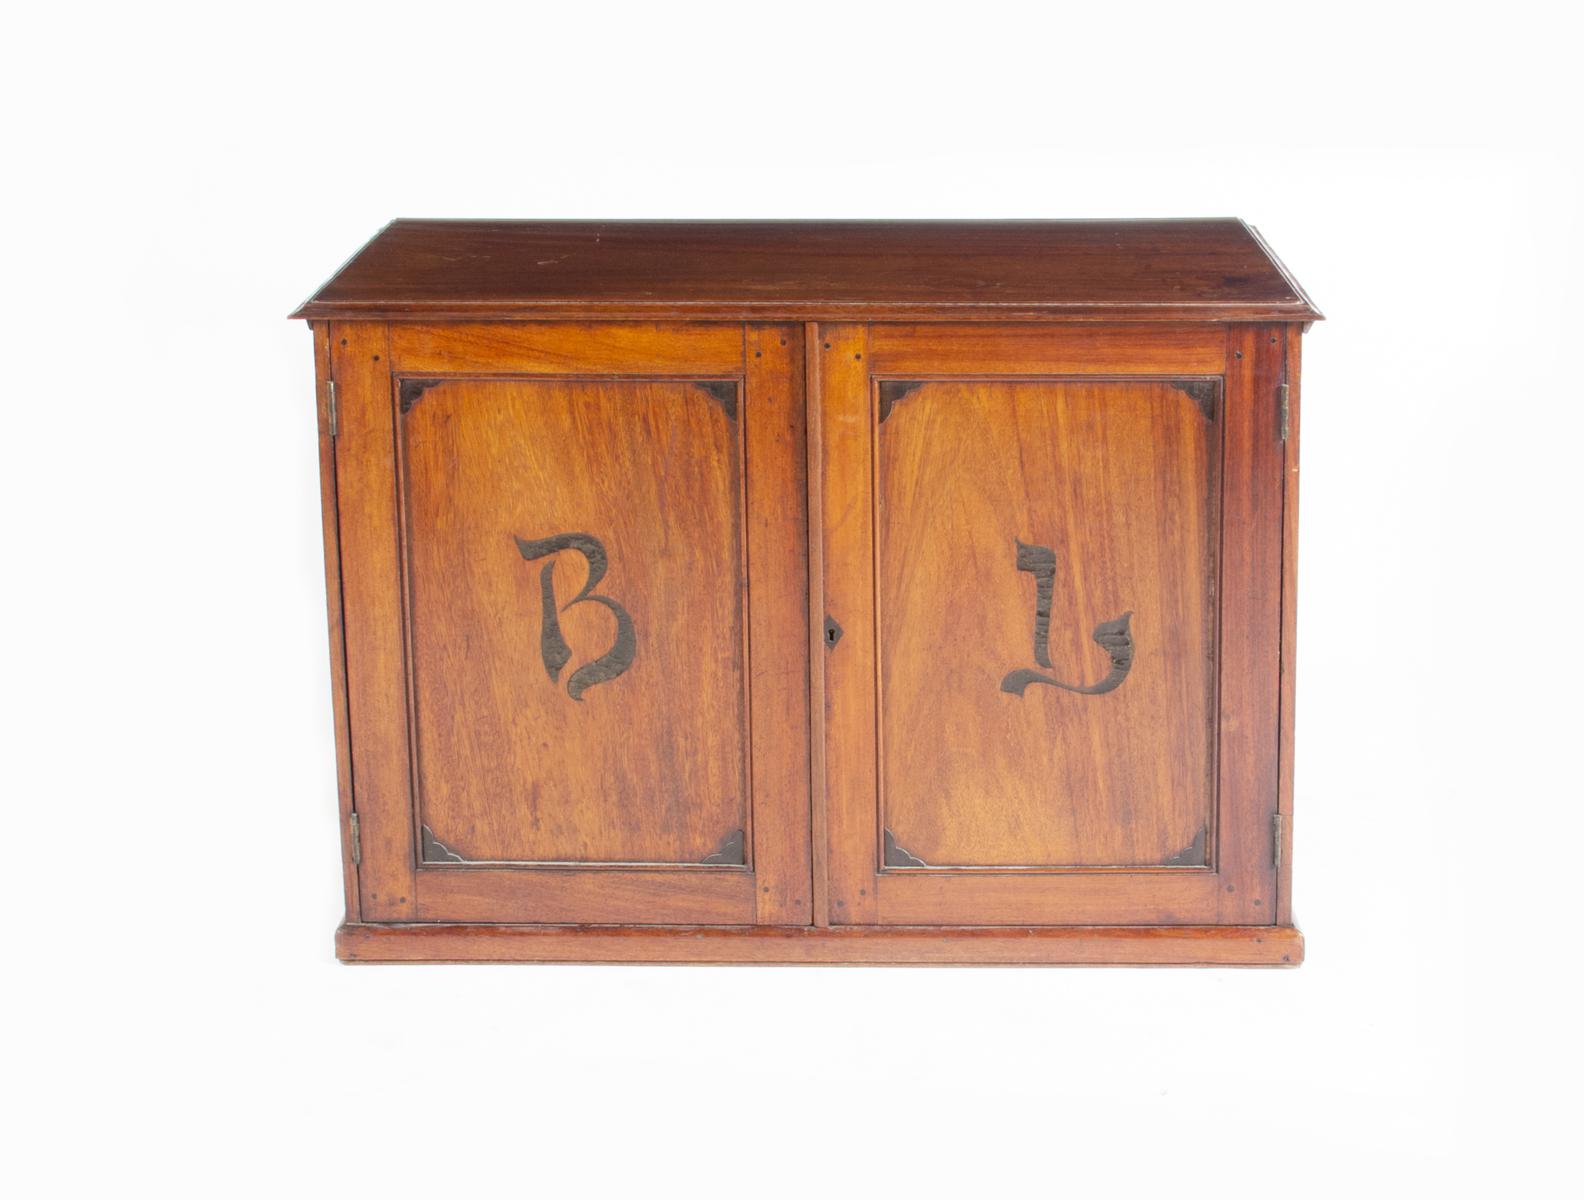 An Iroko wood  print/drawing chest with Urushi lacquer BL monogram, made for Bernard Leach (to his